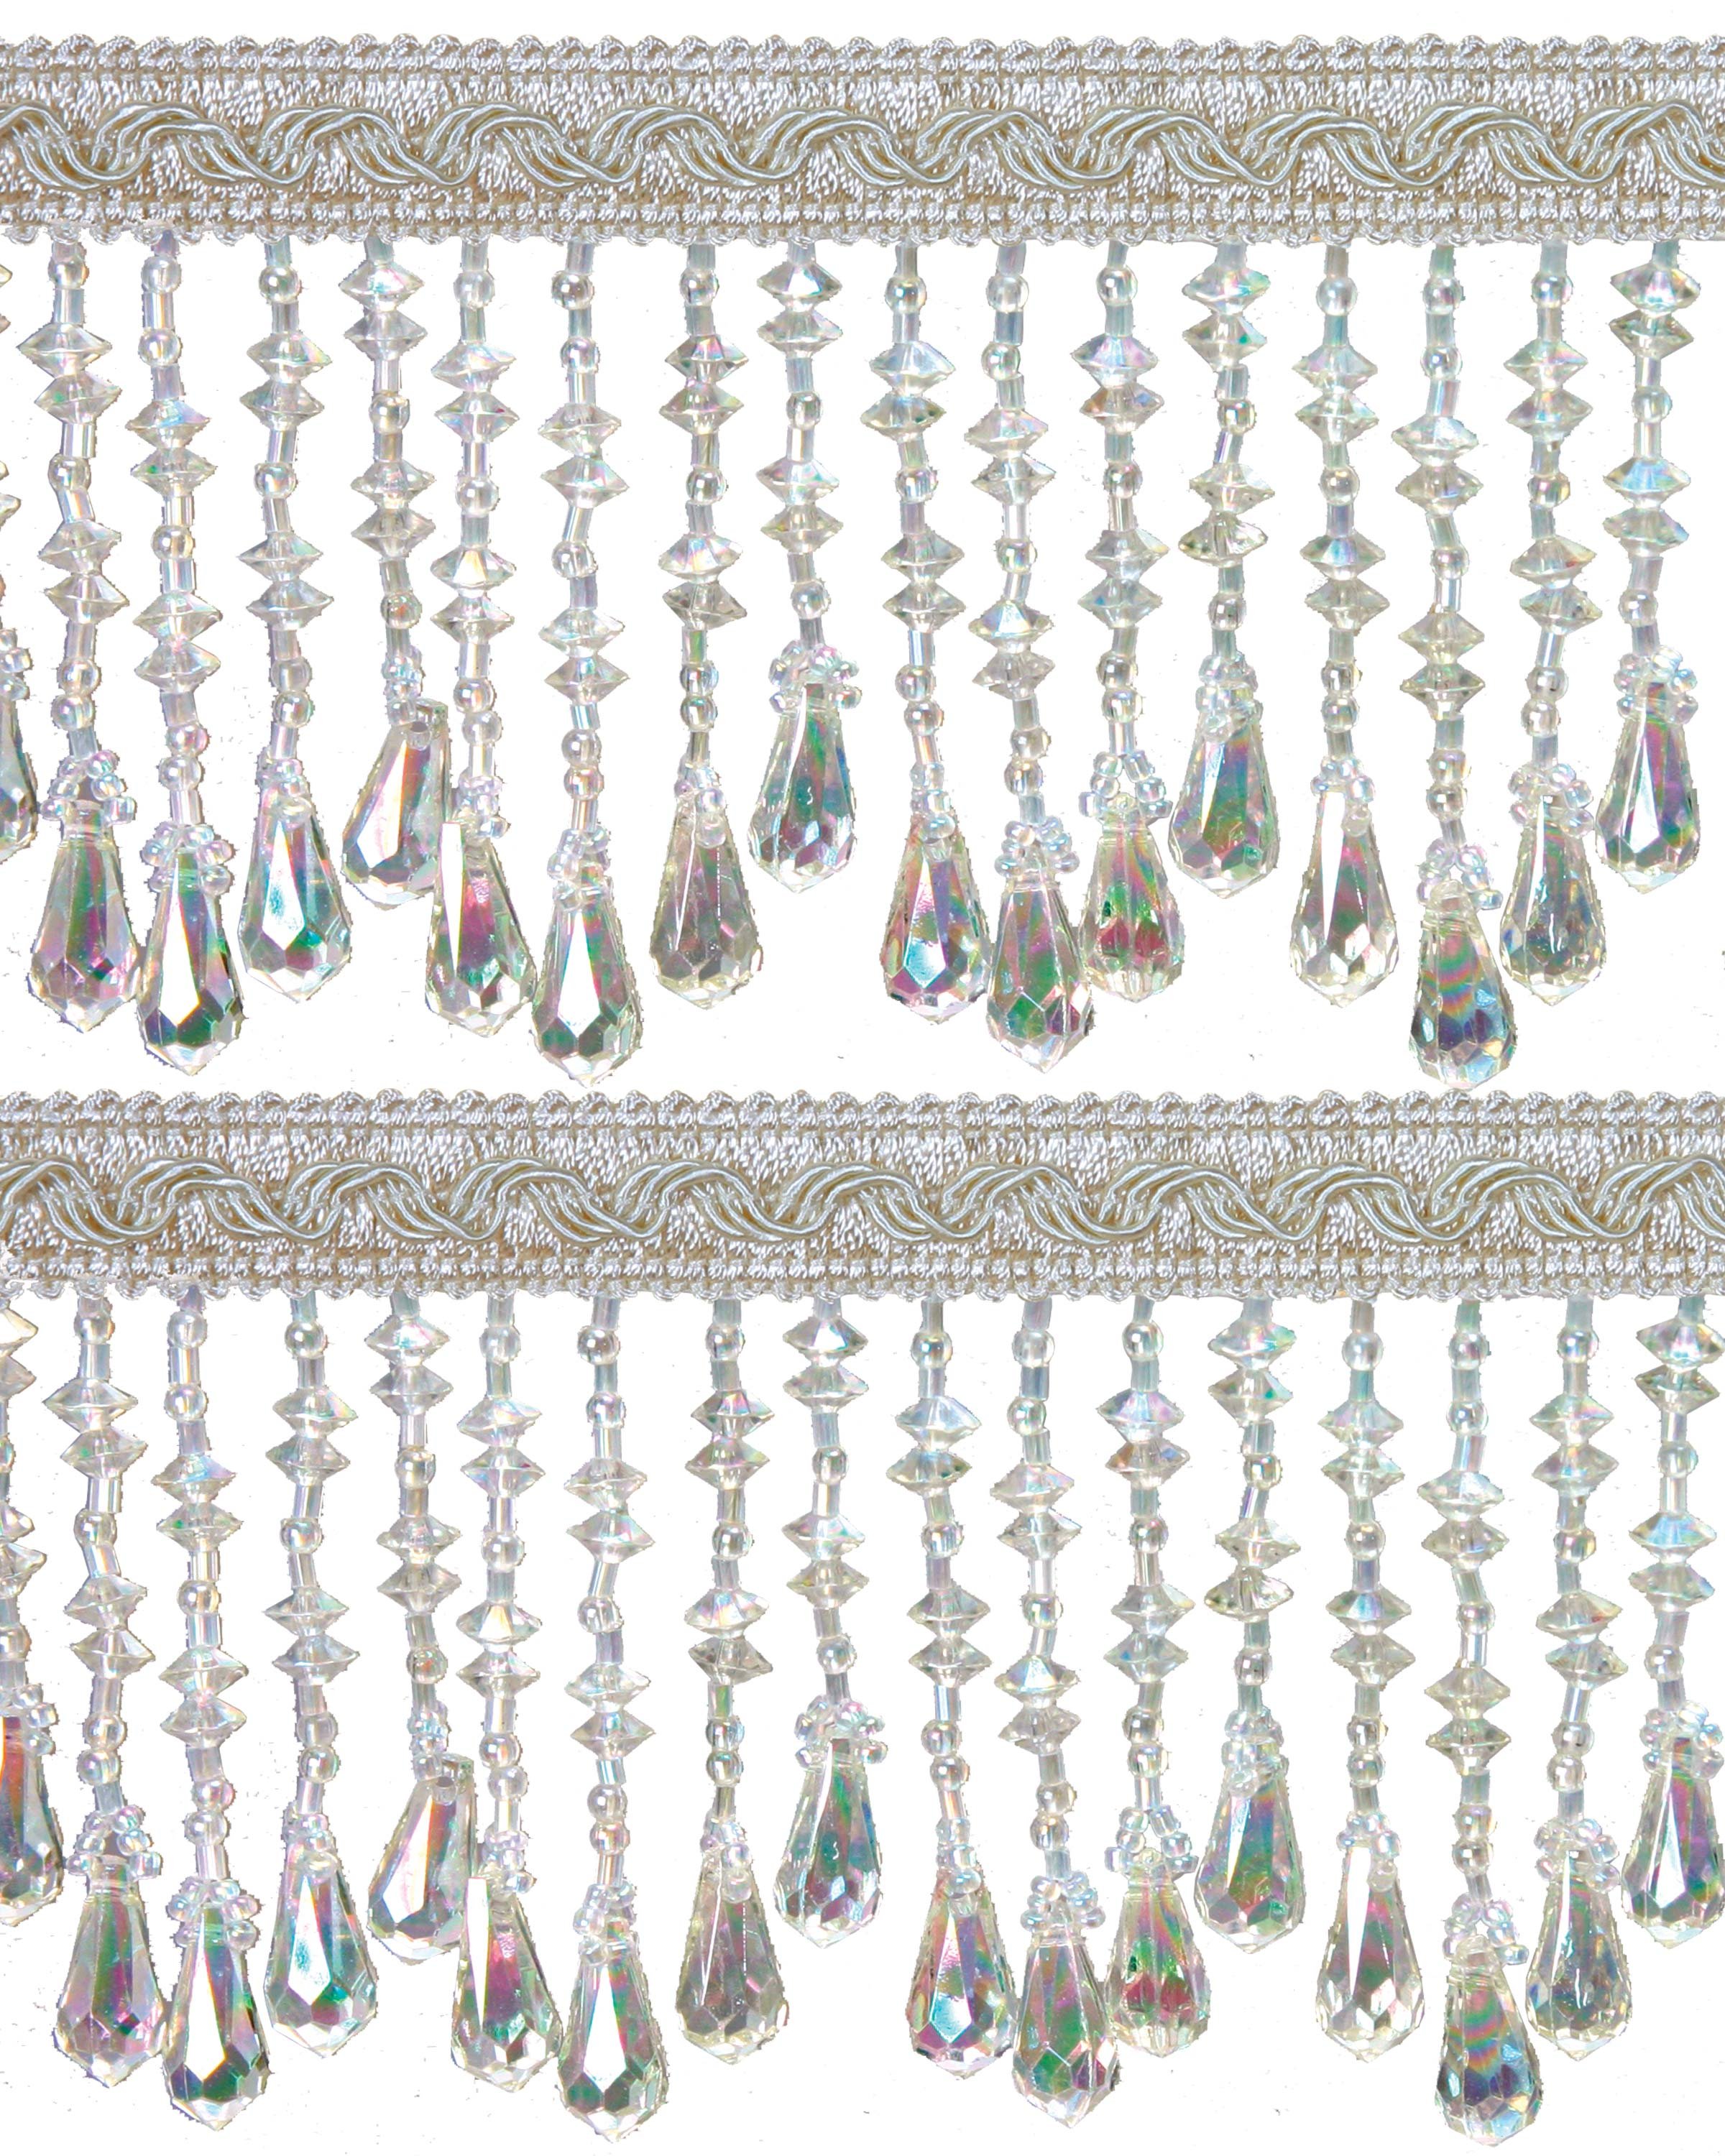 Fringe Beading - Pearlised 70mm Price is for 5 metres